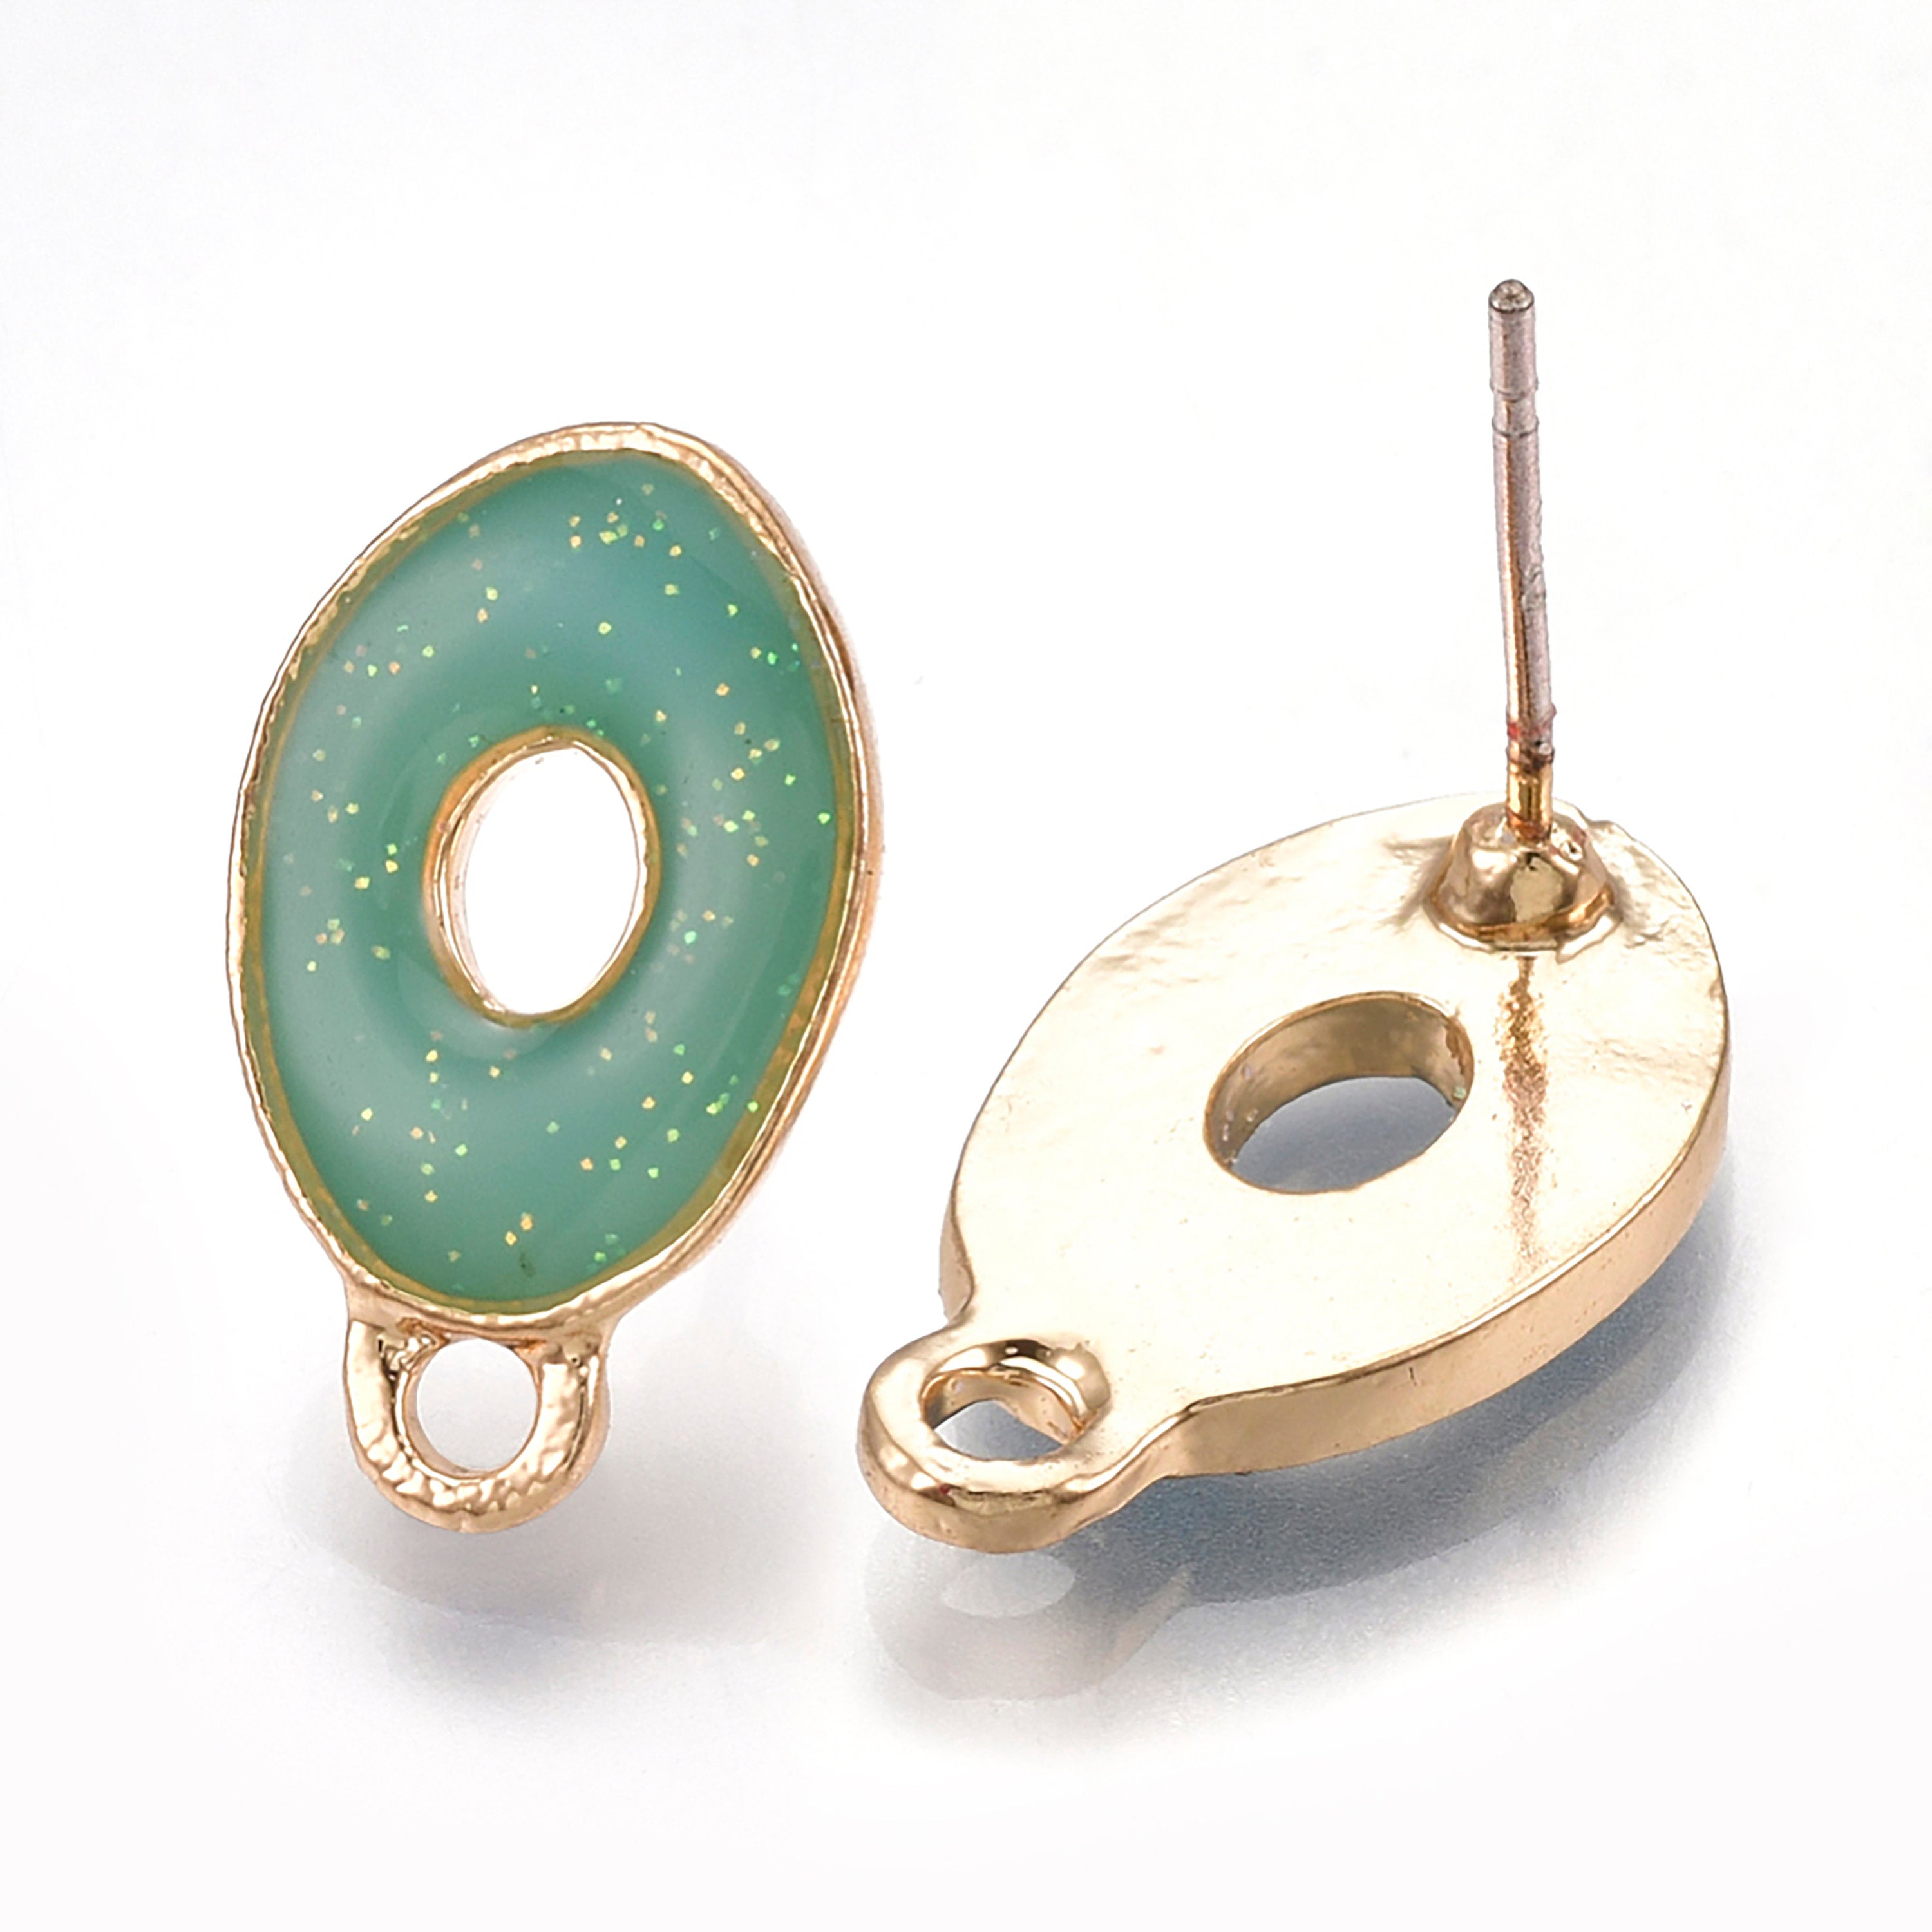 2pcs, 17x10mm, Donut Oval Shaped Enamel Ear Stud with glitter and sterling silver pin in light gold setting